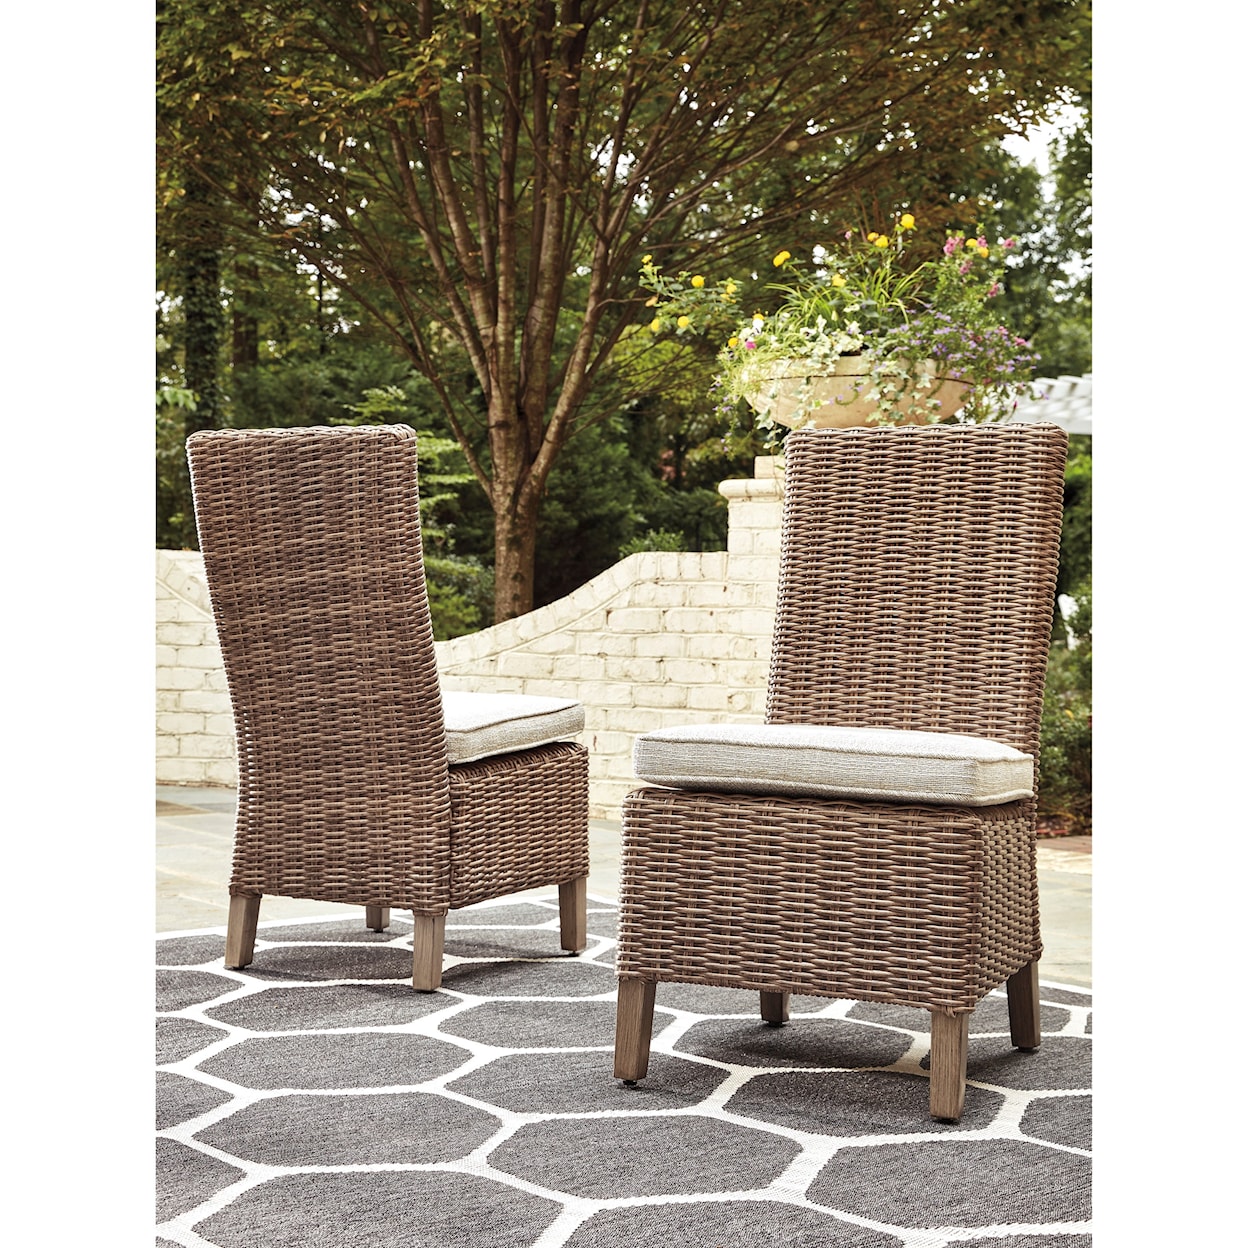 Benchcraft Beachcroft Set of 2 Side Chairs with Cushion